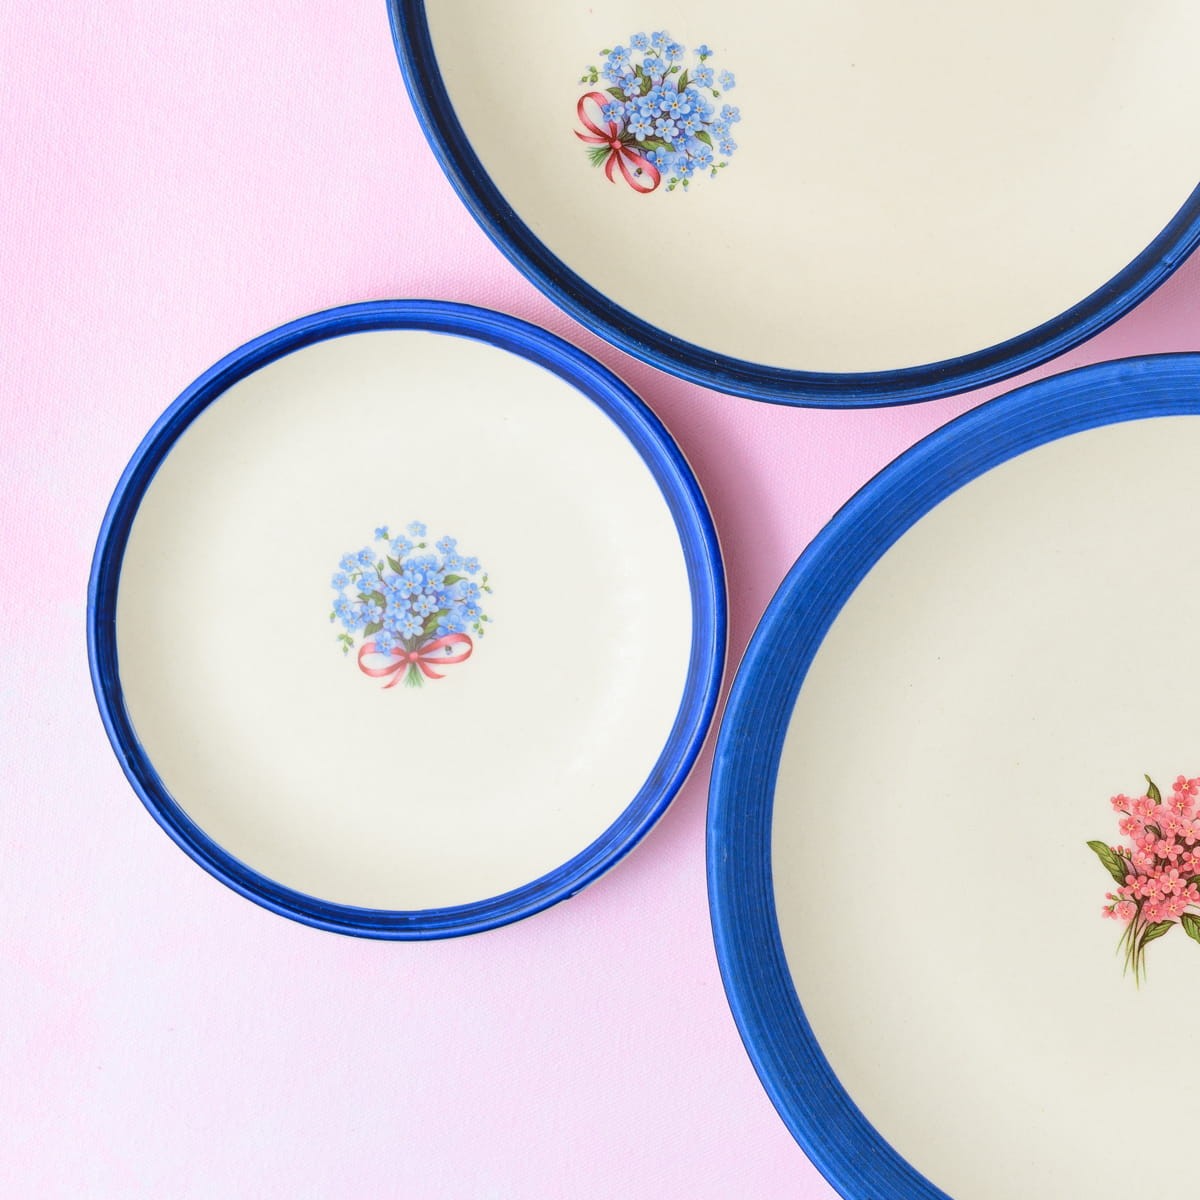 Floral Whispers in Blue Wall Decor Ceramics Plate Small